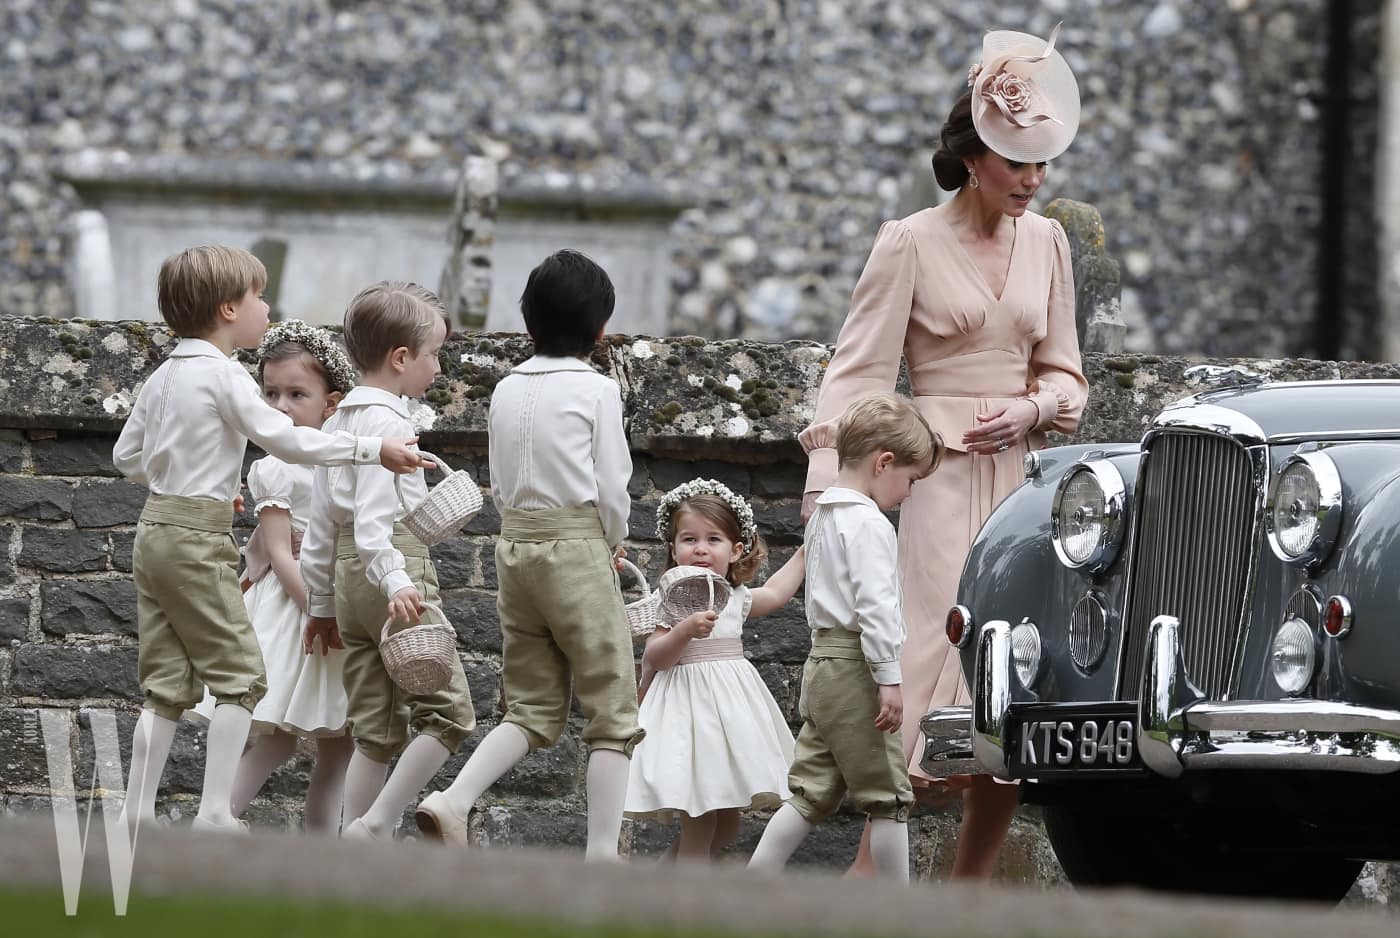 ENGLEFIELD, ENGLAND - MAY 20:  Catherine, Duchess of Cambridge, right, walks with the flower boys and girls, including Prince George, second right, and Princess Charlotte after the wedding of Pippa Middleton and James Matthews at St Mark's Church ion May 20, 2017 in in Englefield, England.  Middleton, the sister of Catherine, Duchess of Cambridge married hedge fund manager James Matthews in a ceremony Saturday where her niece and nephew Prince George and Princess Charlotte was in the wedding party, along with sister Kate and princes Harry and William. (Photo by Kirsty Wigglesworth - Pool/Getty Images)